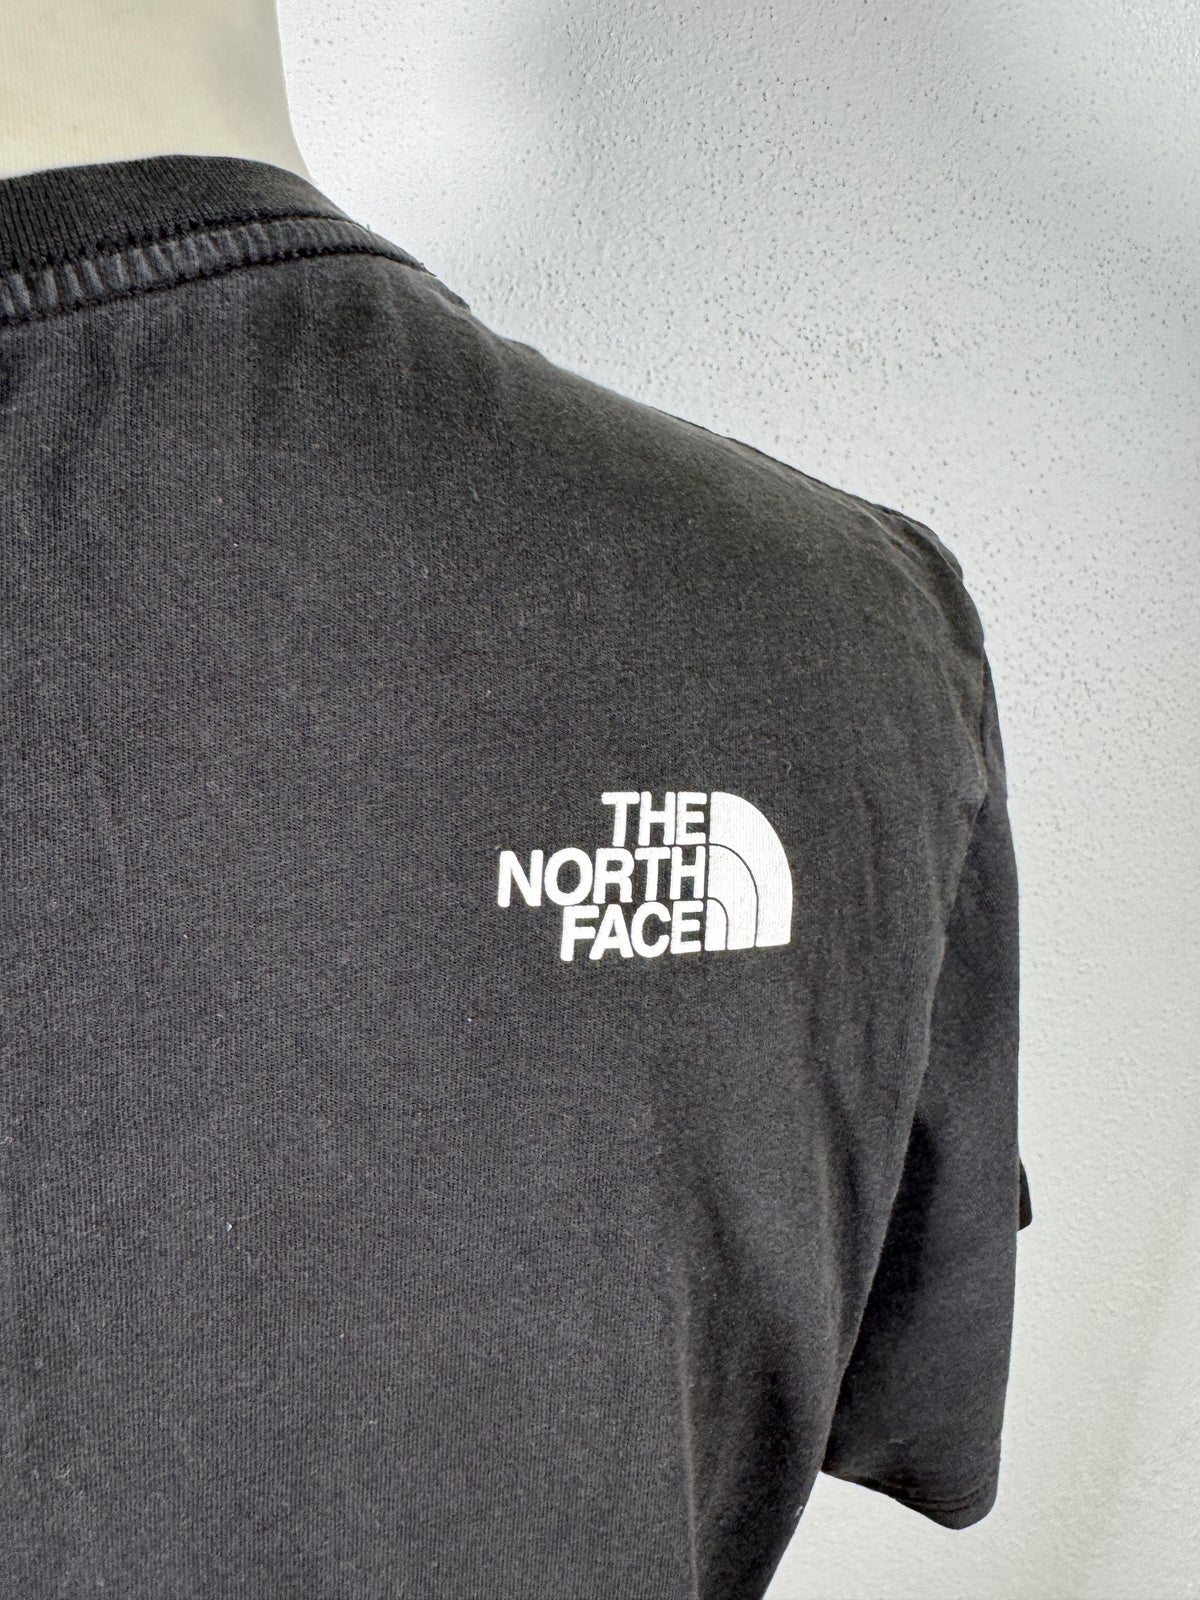 T-shirt, The North Face , str. L